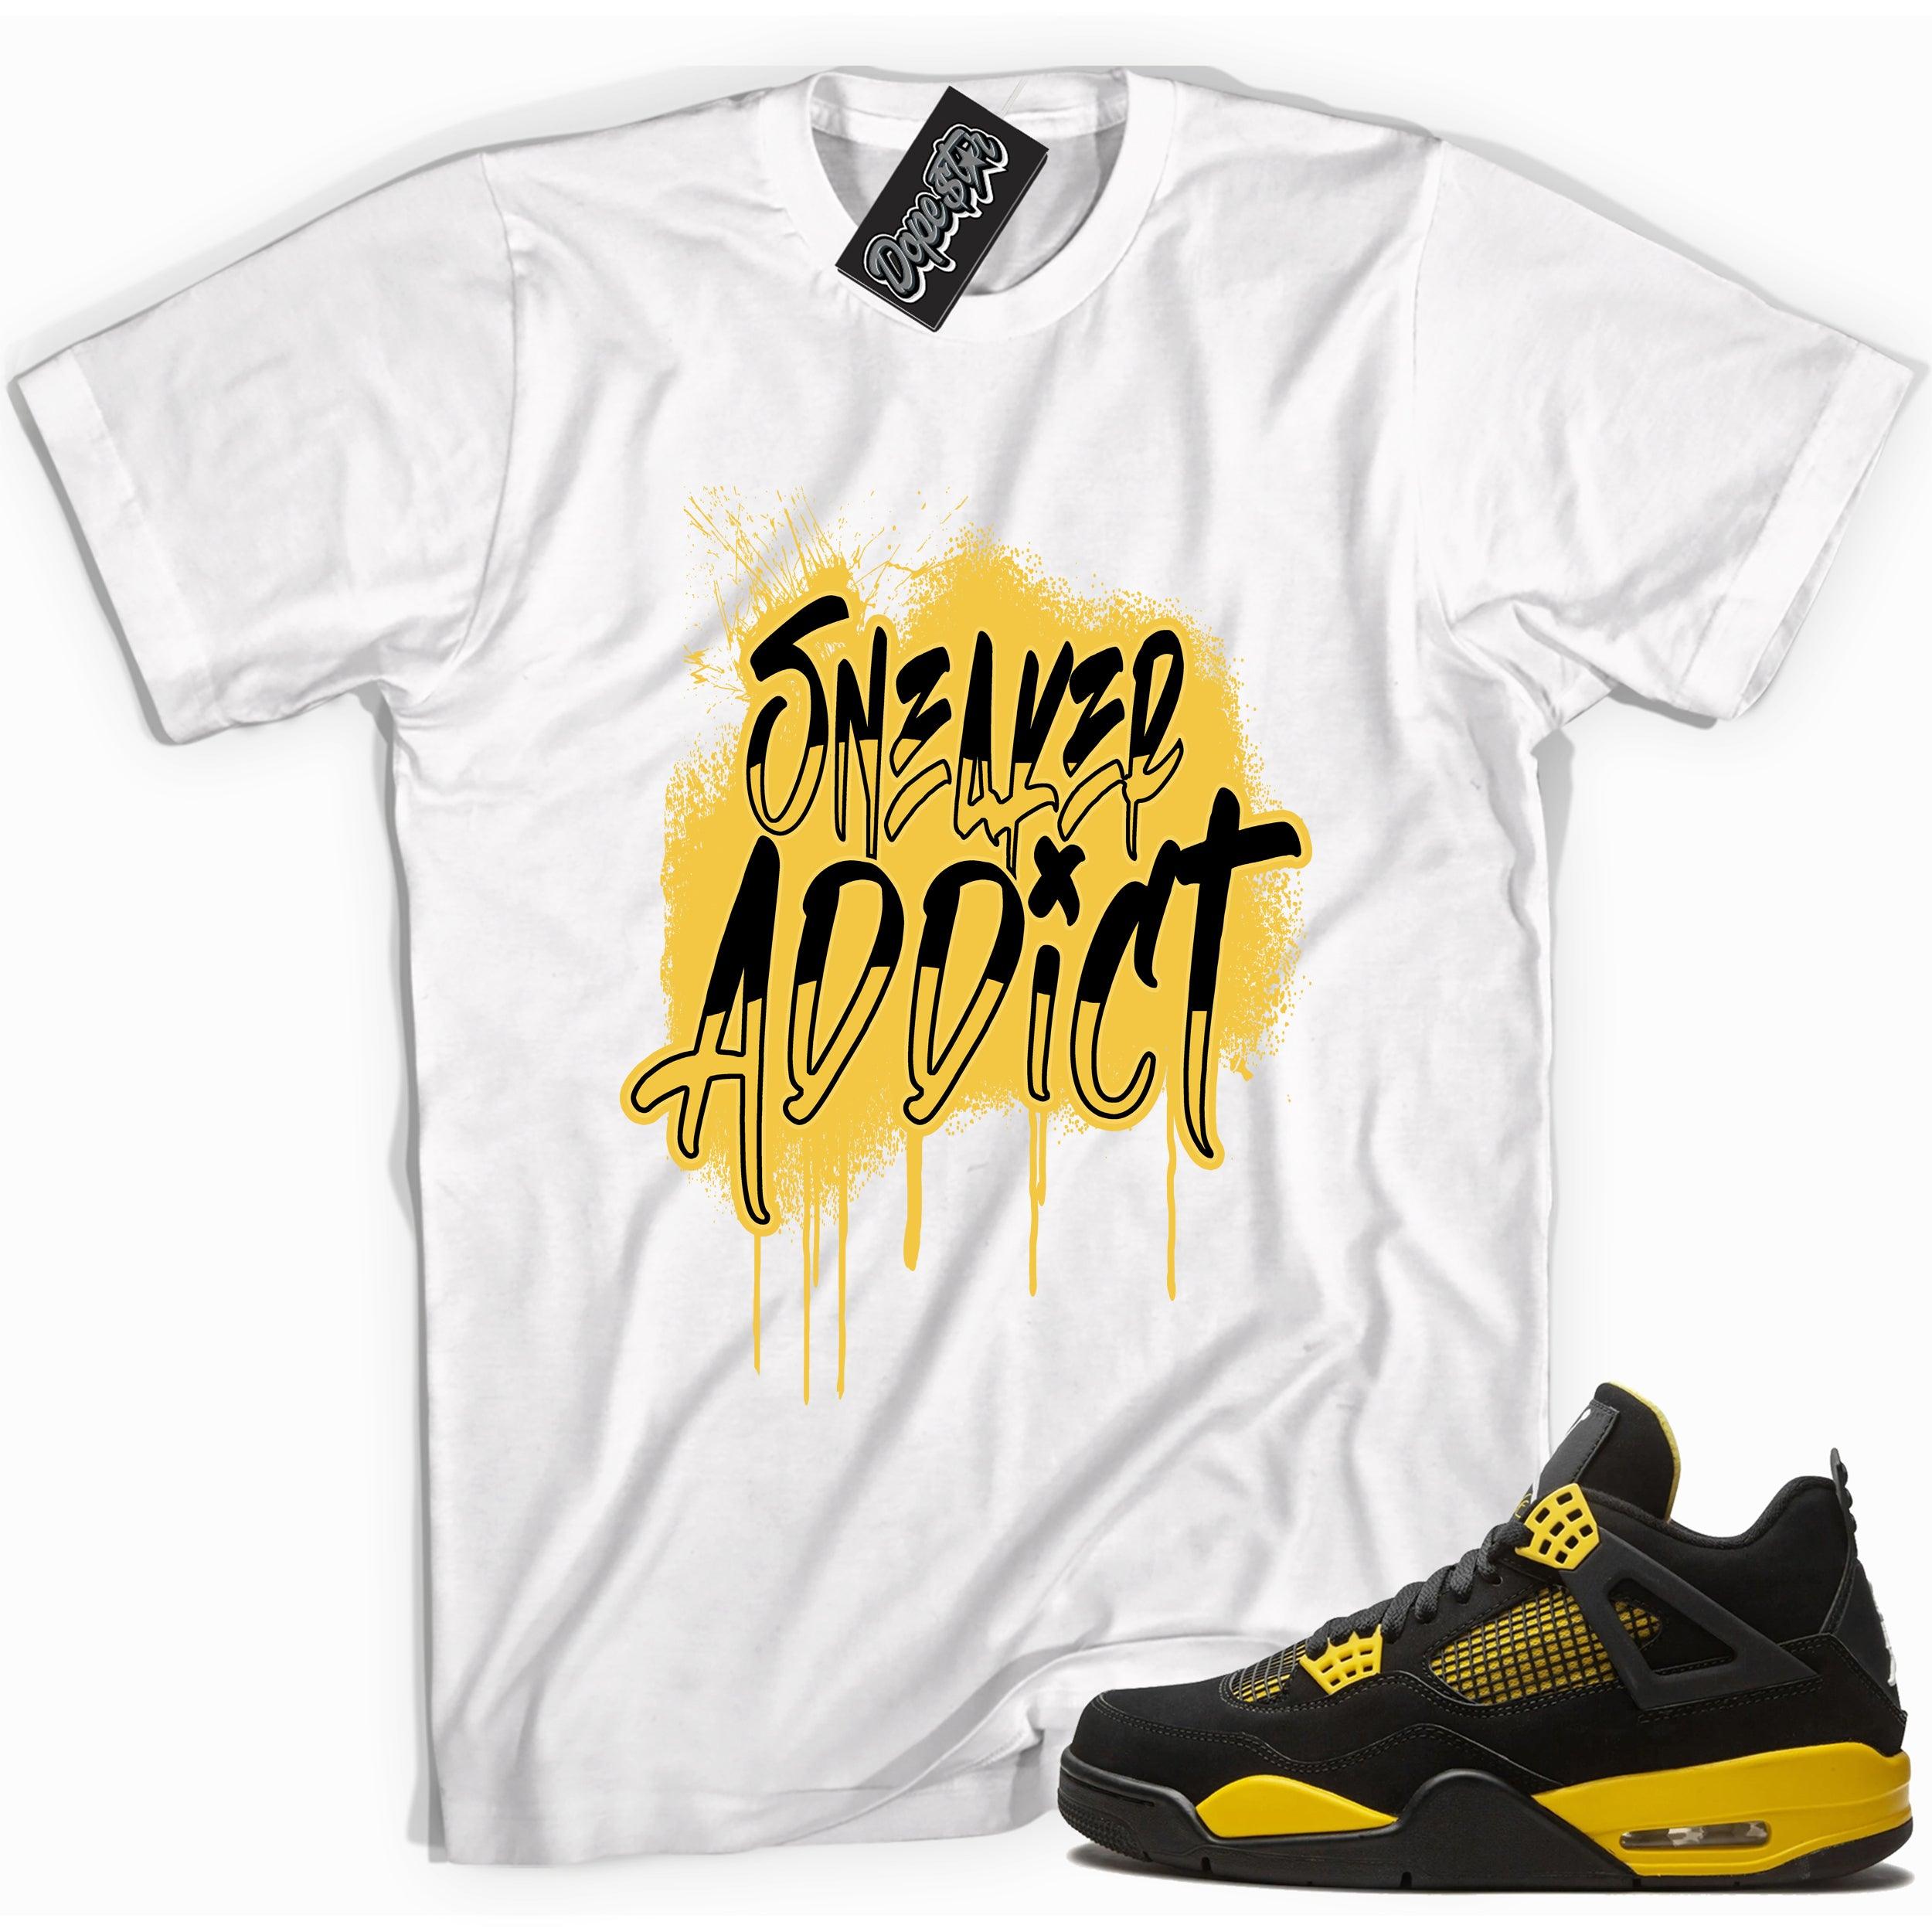 Cool white graphic tee with 'sneaker addict' print, that perfectly matches Air Jordan 4 Thunder sneakers